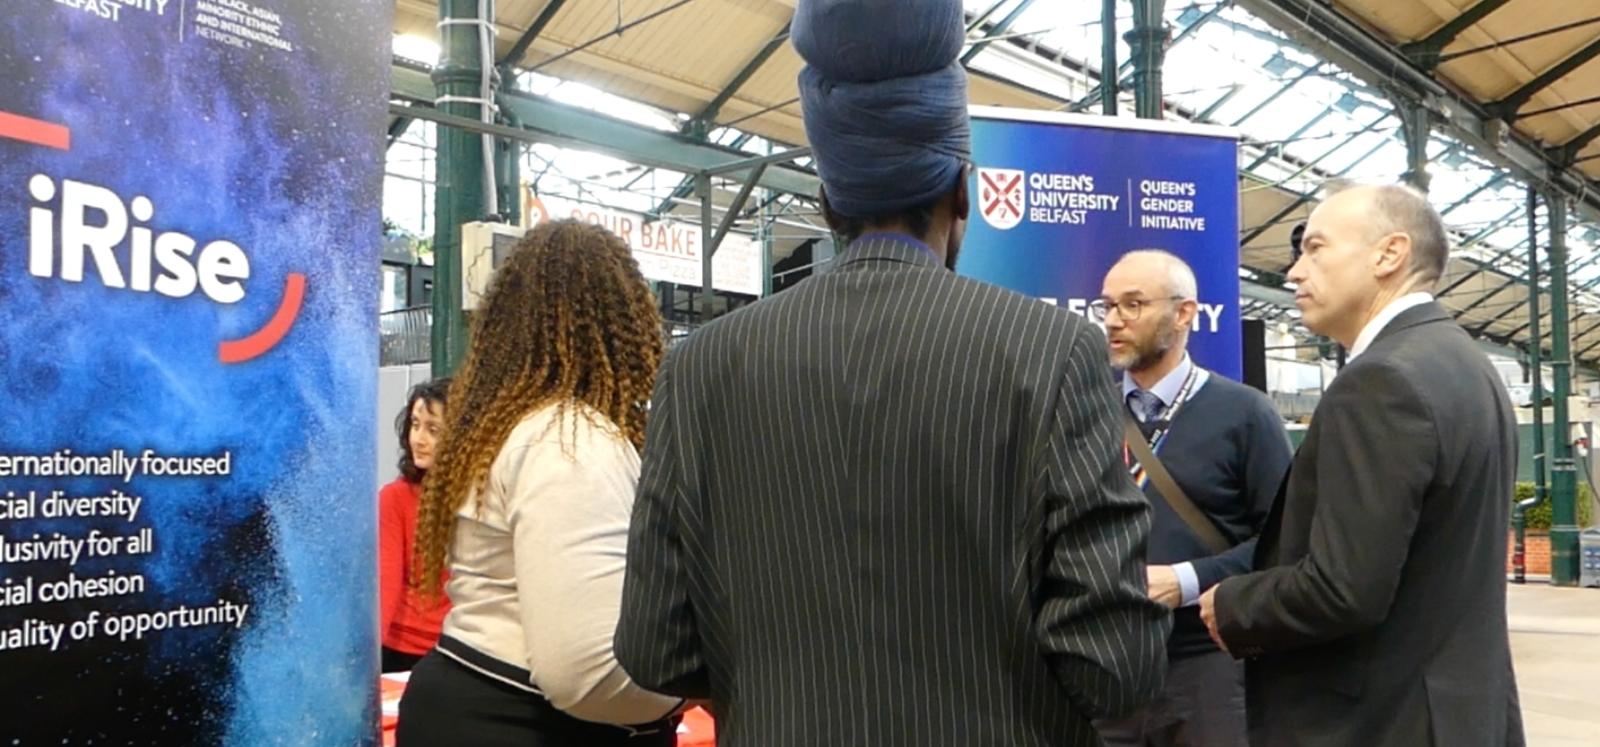 Secretary of State, Chris Heaton-Harris, at the QUB iRise stall at the Black History Month expo, St George's Market